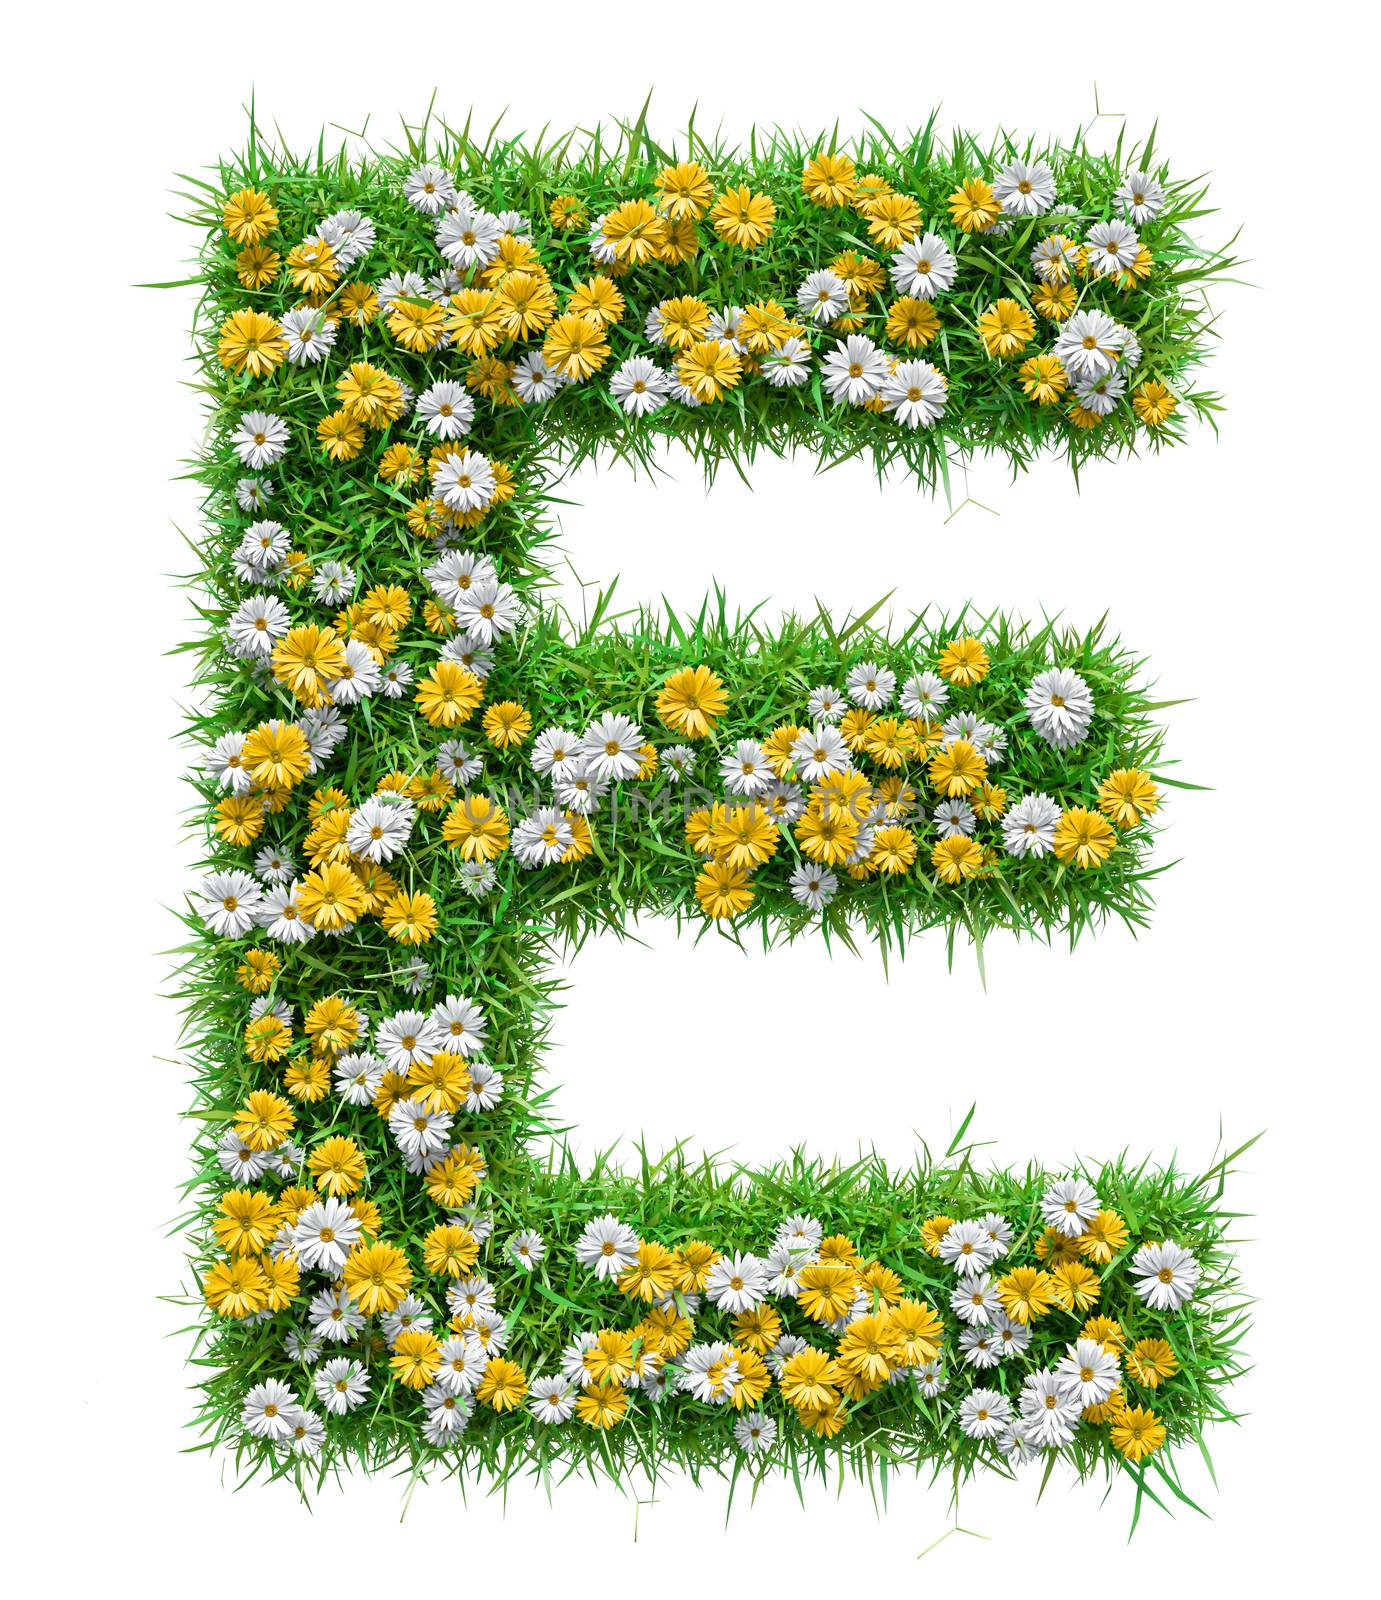 Letter E Of Green Grass And Flowers by cherezoff